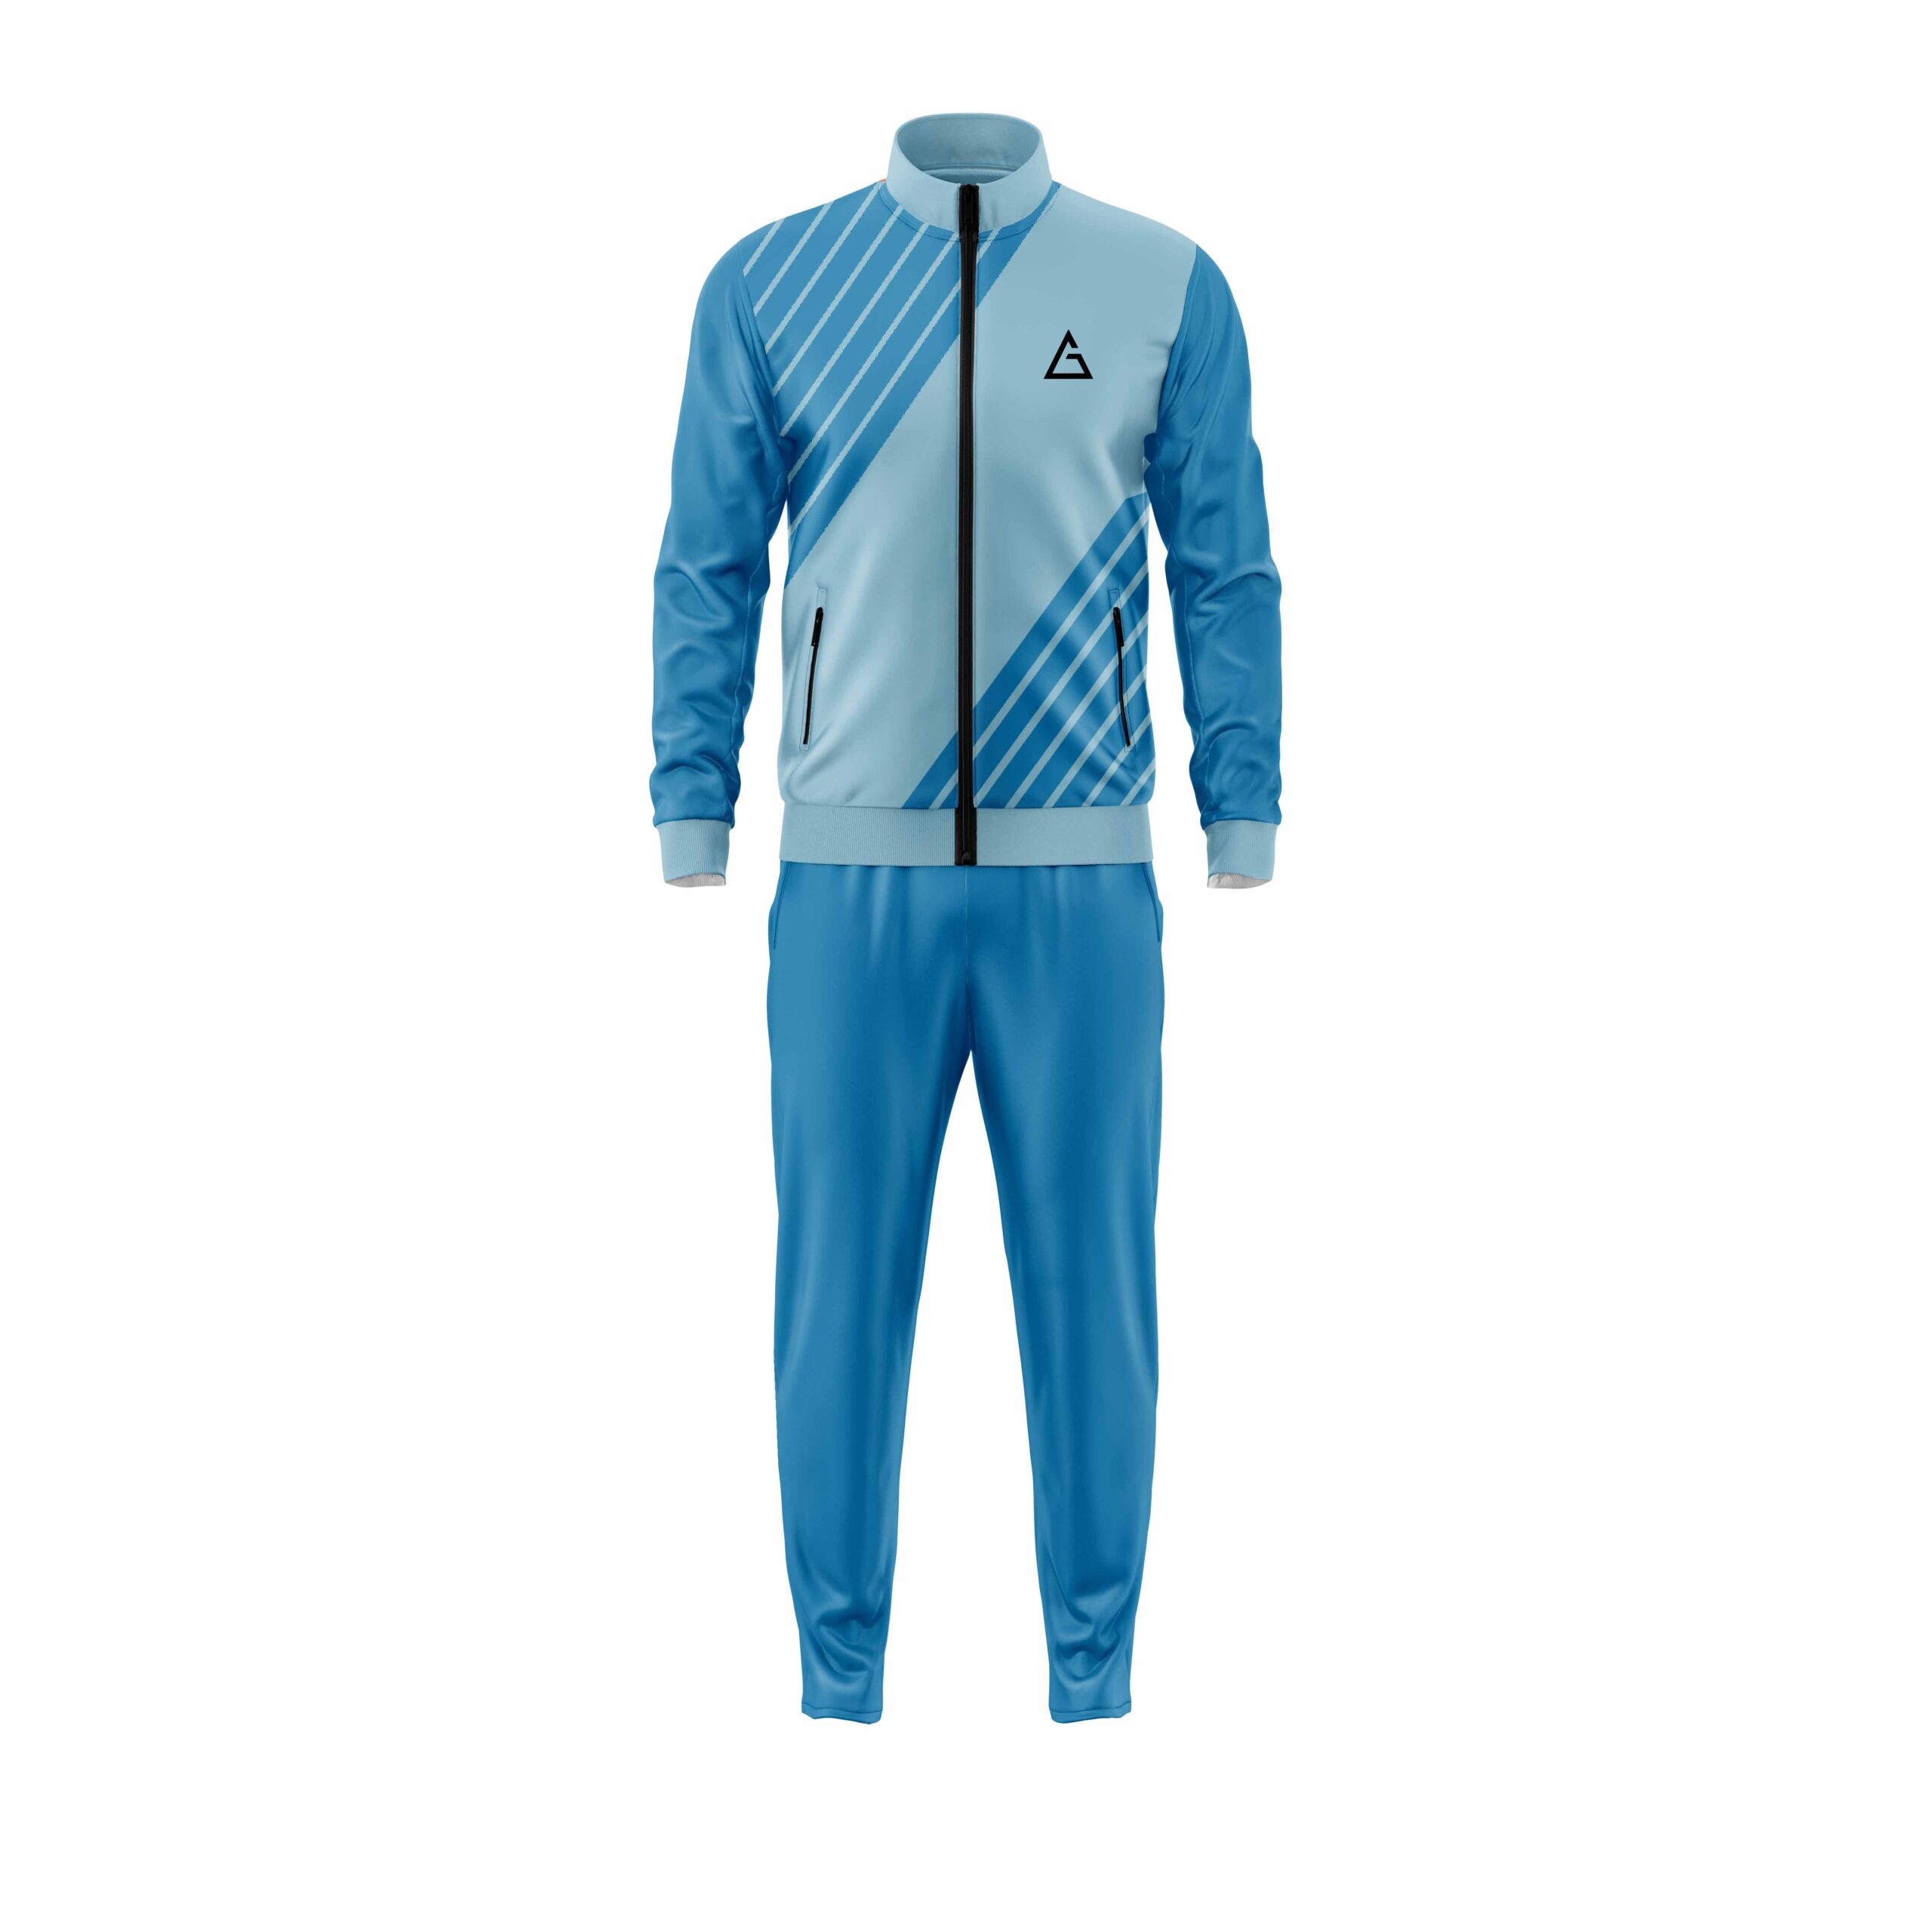 tracksuits branded export quality design